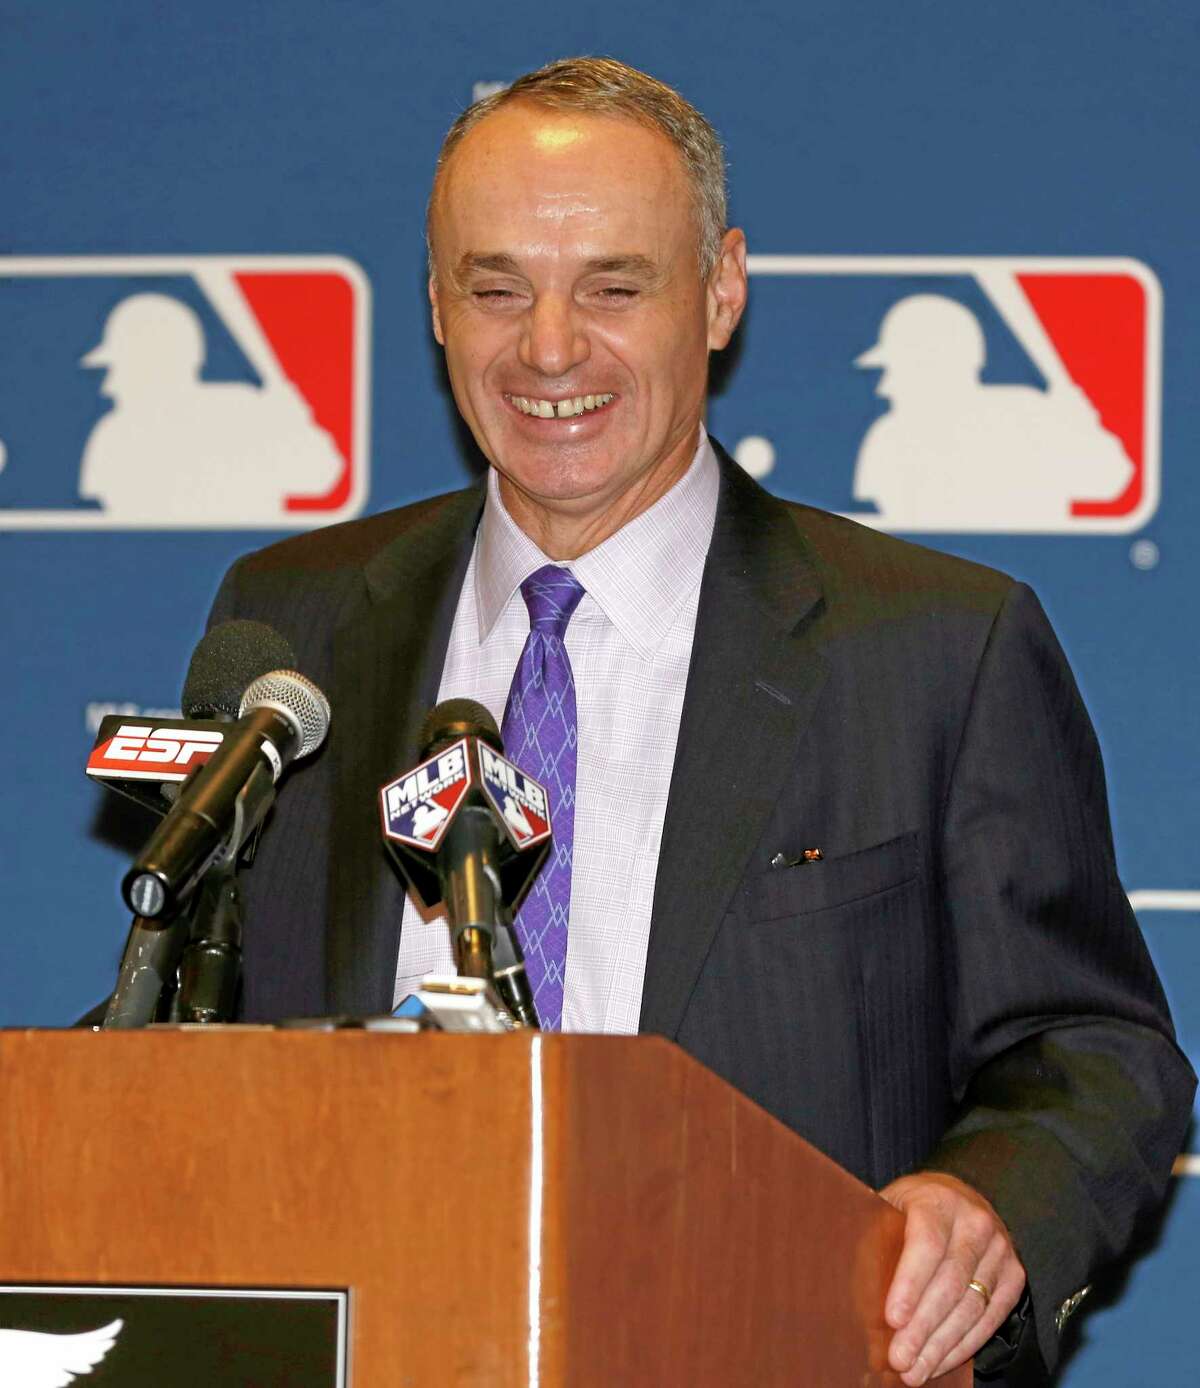 Major League Baseball Chief Operating Officer Rob Manfred has been elected the 10th commissioner of MLB.